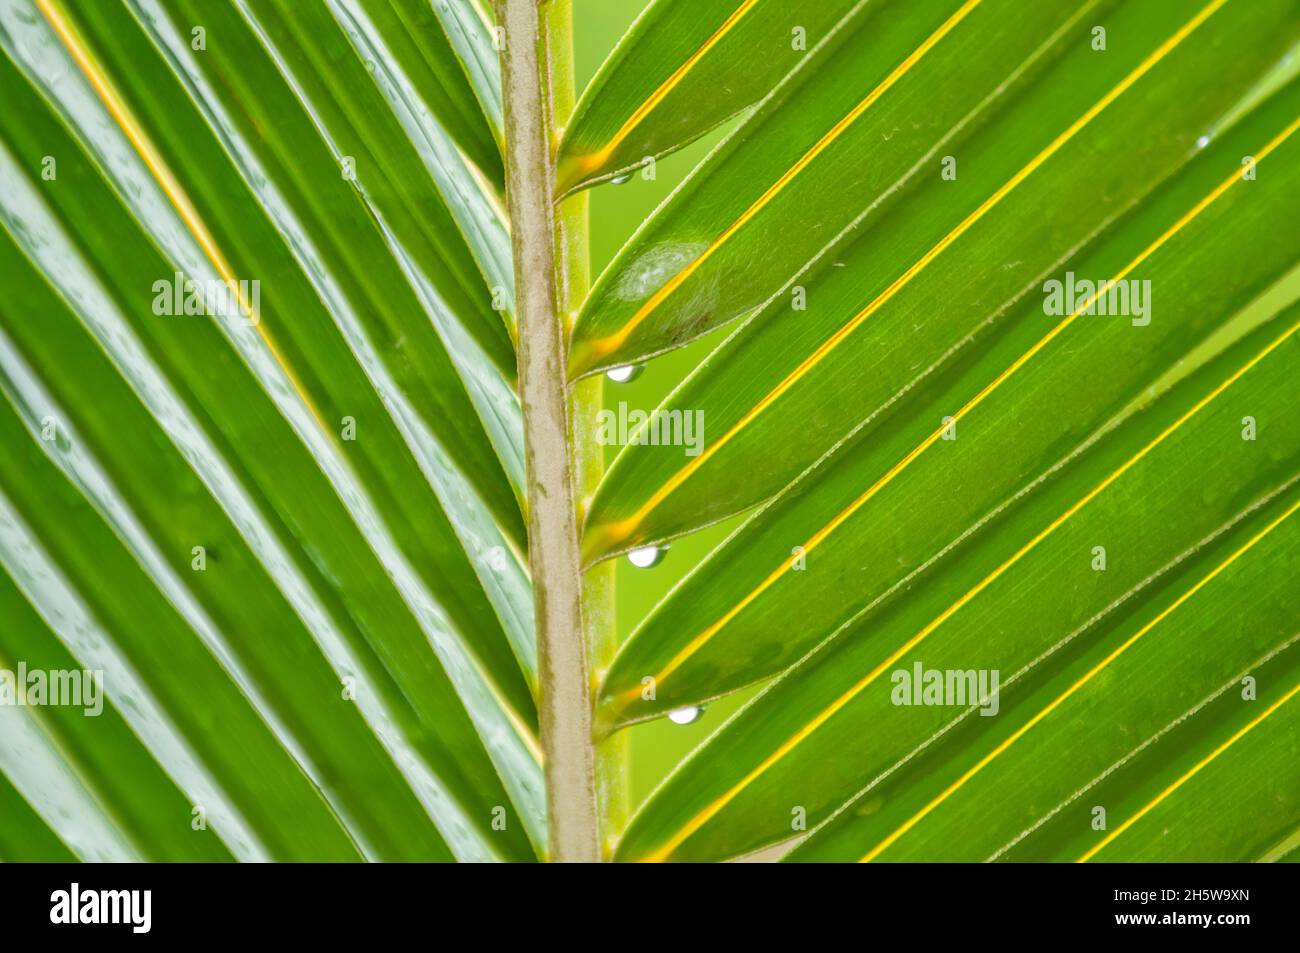 Water Drop On Tropical Palm Leaf, Light Green Foliage, Nature Background Stock Photo